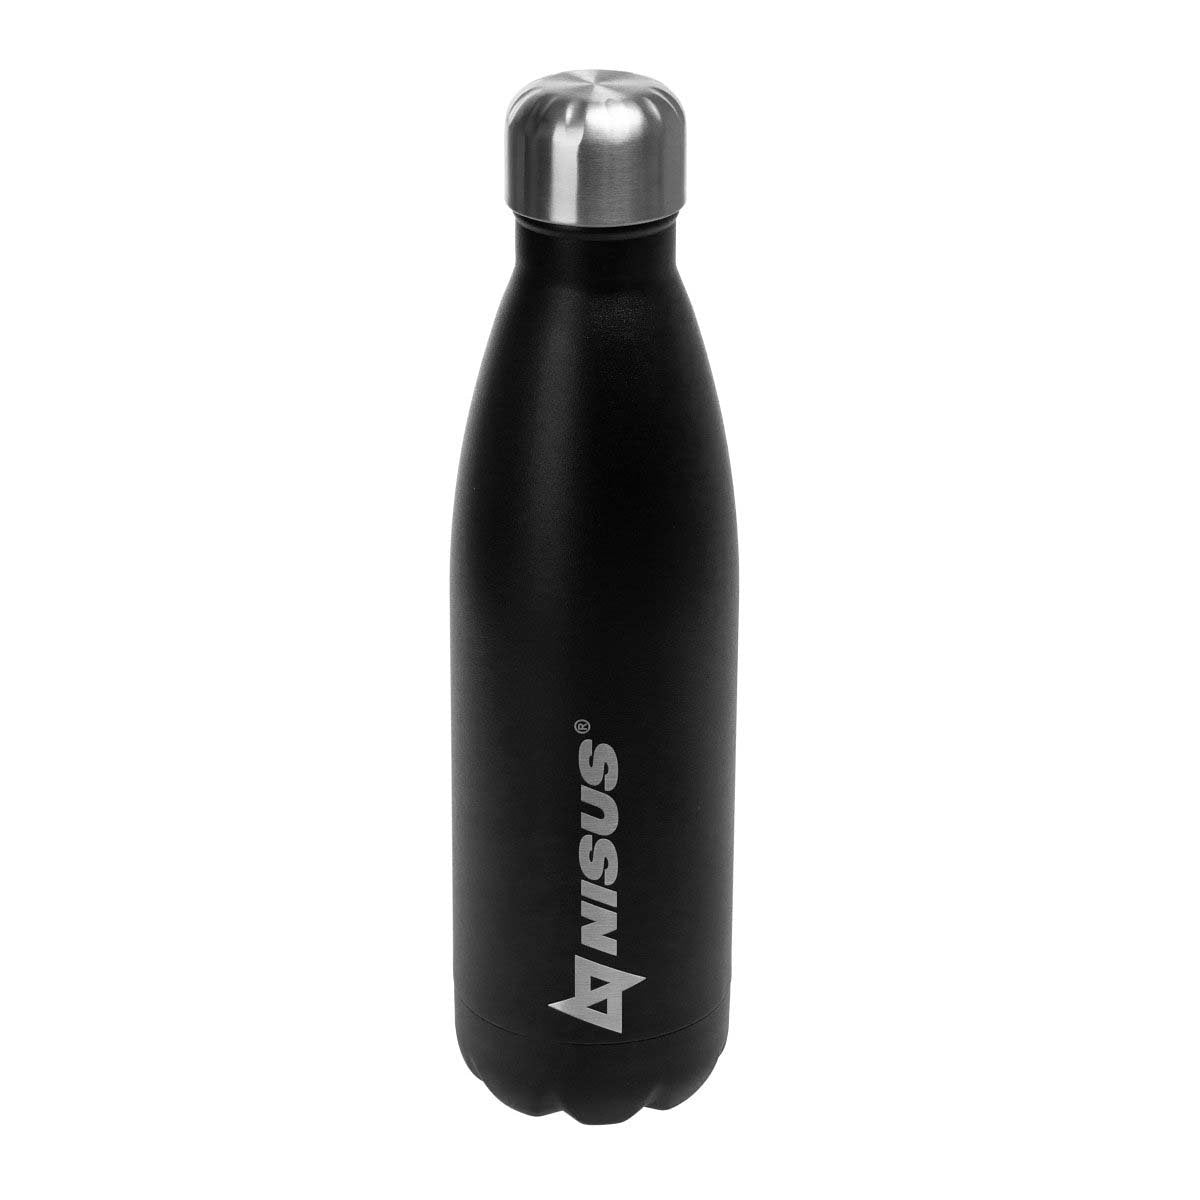 Stainless Steel Insulated Twist Top Water Bottle, 17 oz, black